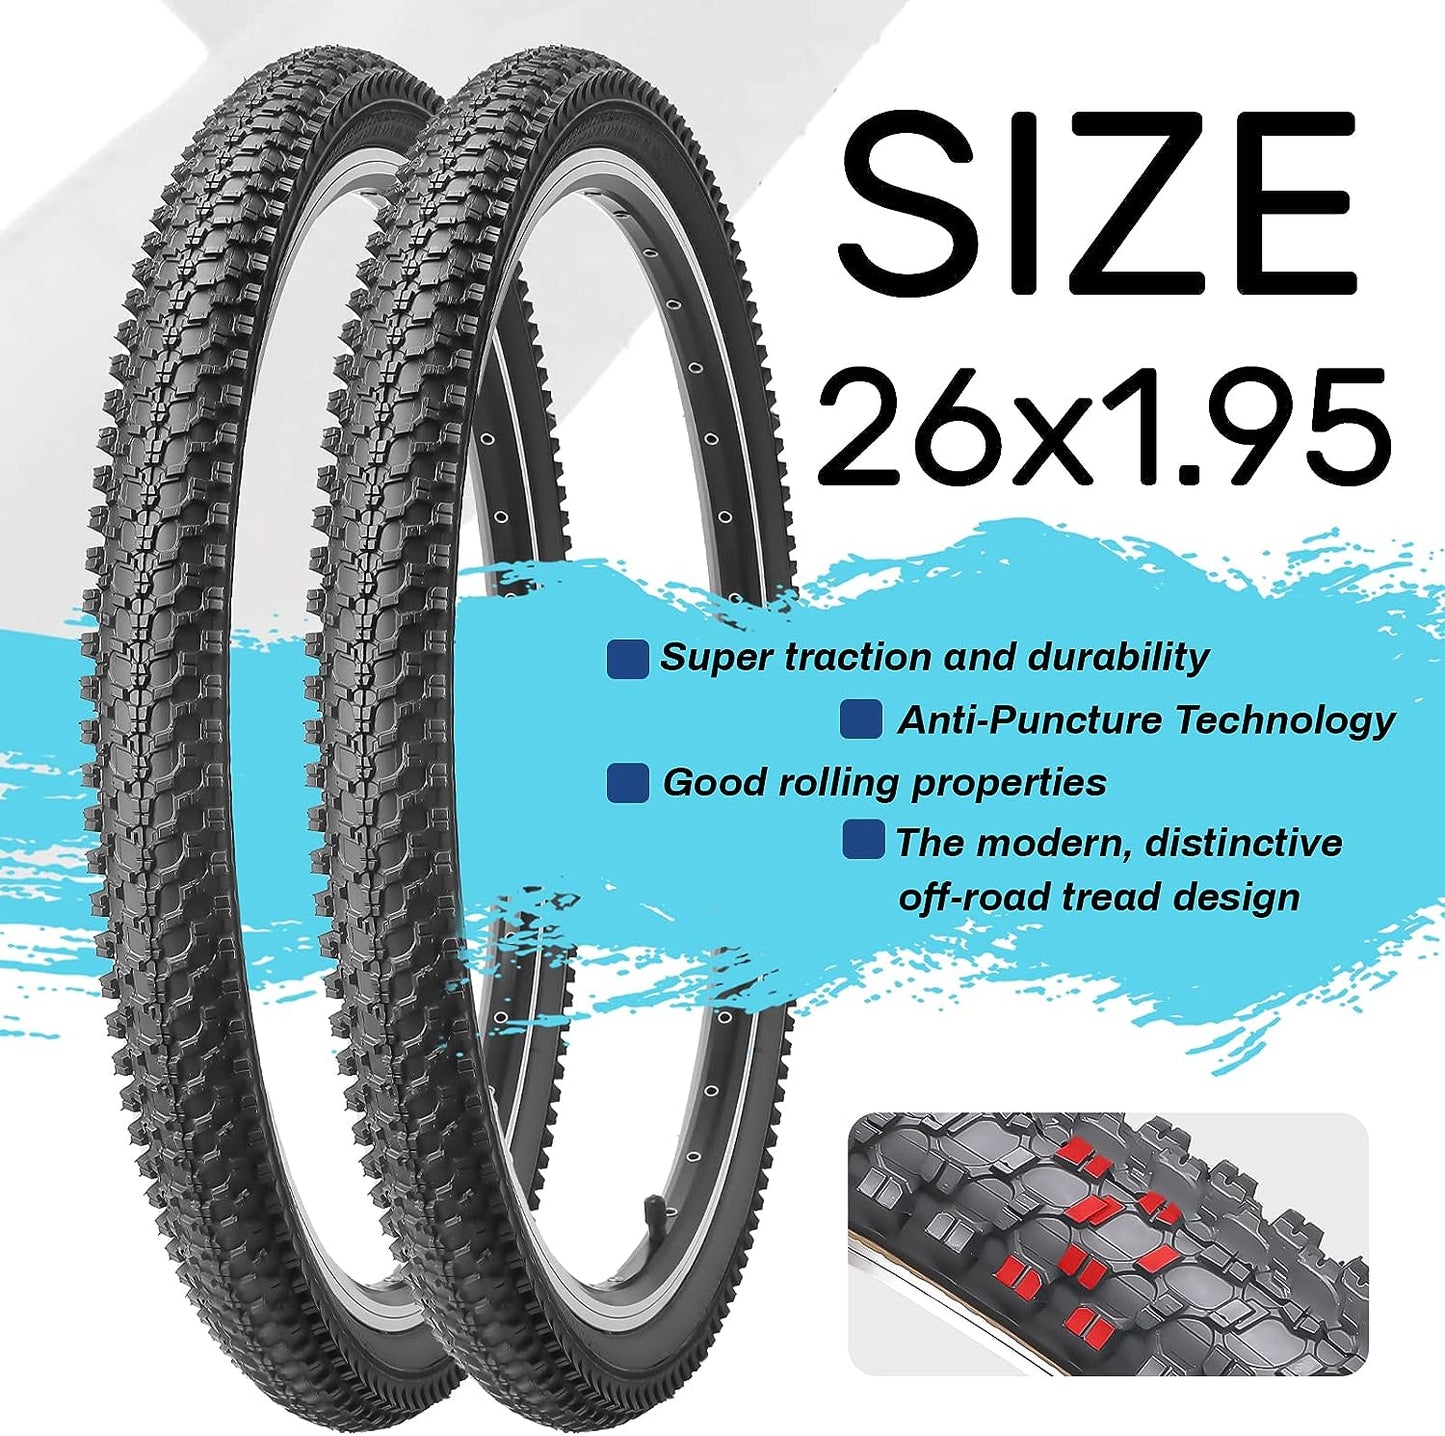 MTB Bicycle Tire, 26 x 1.95 Inch Folding Replacement Tire and Bike Tube